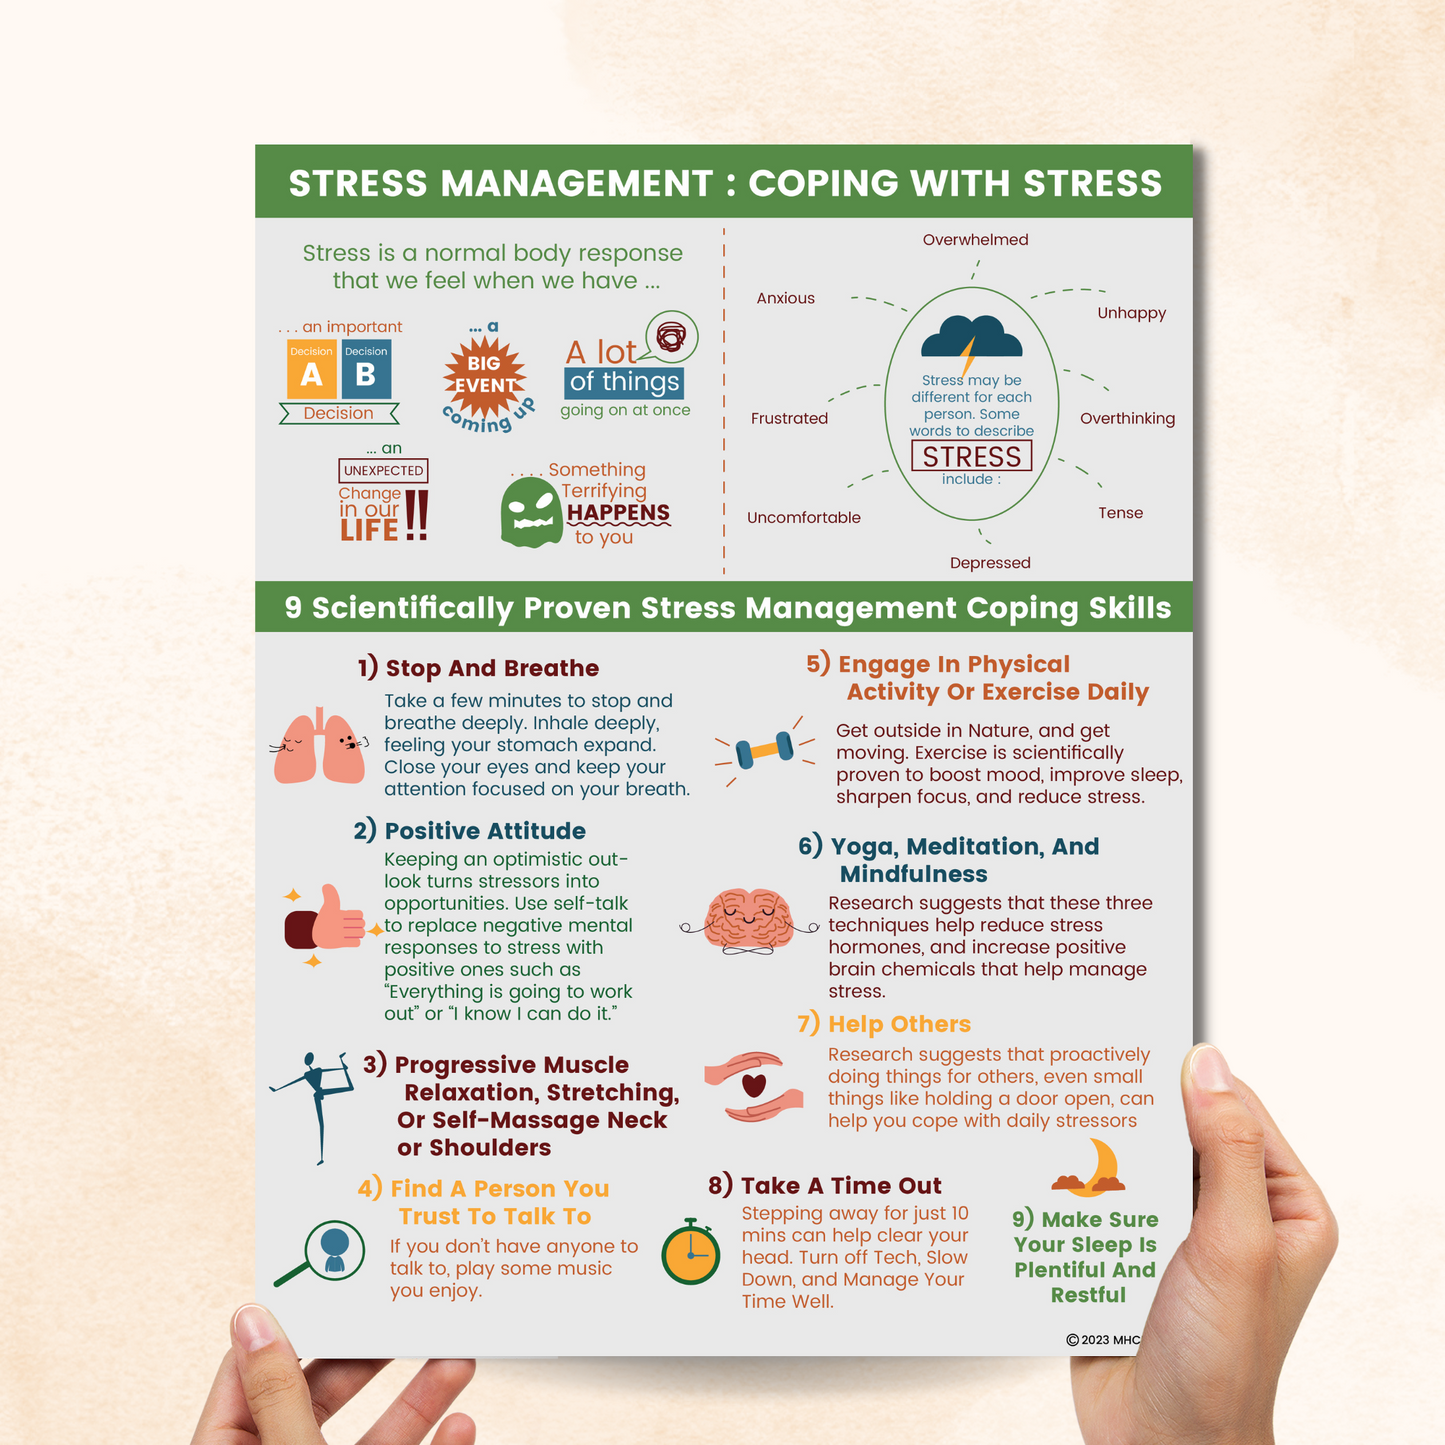 Coping With Stress (PDF)